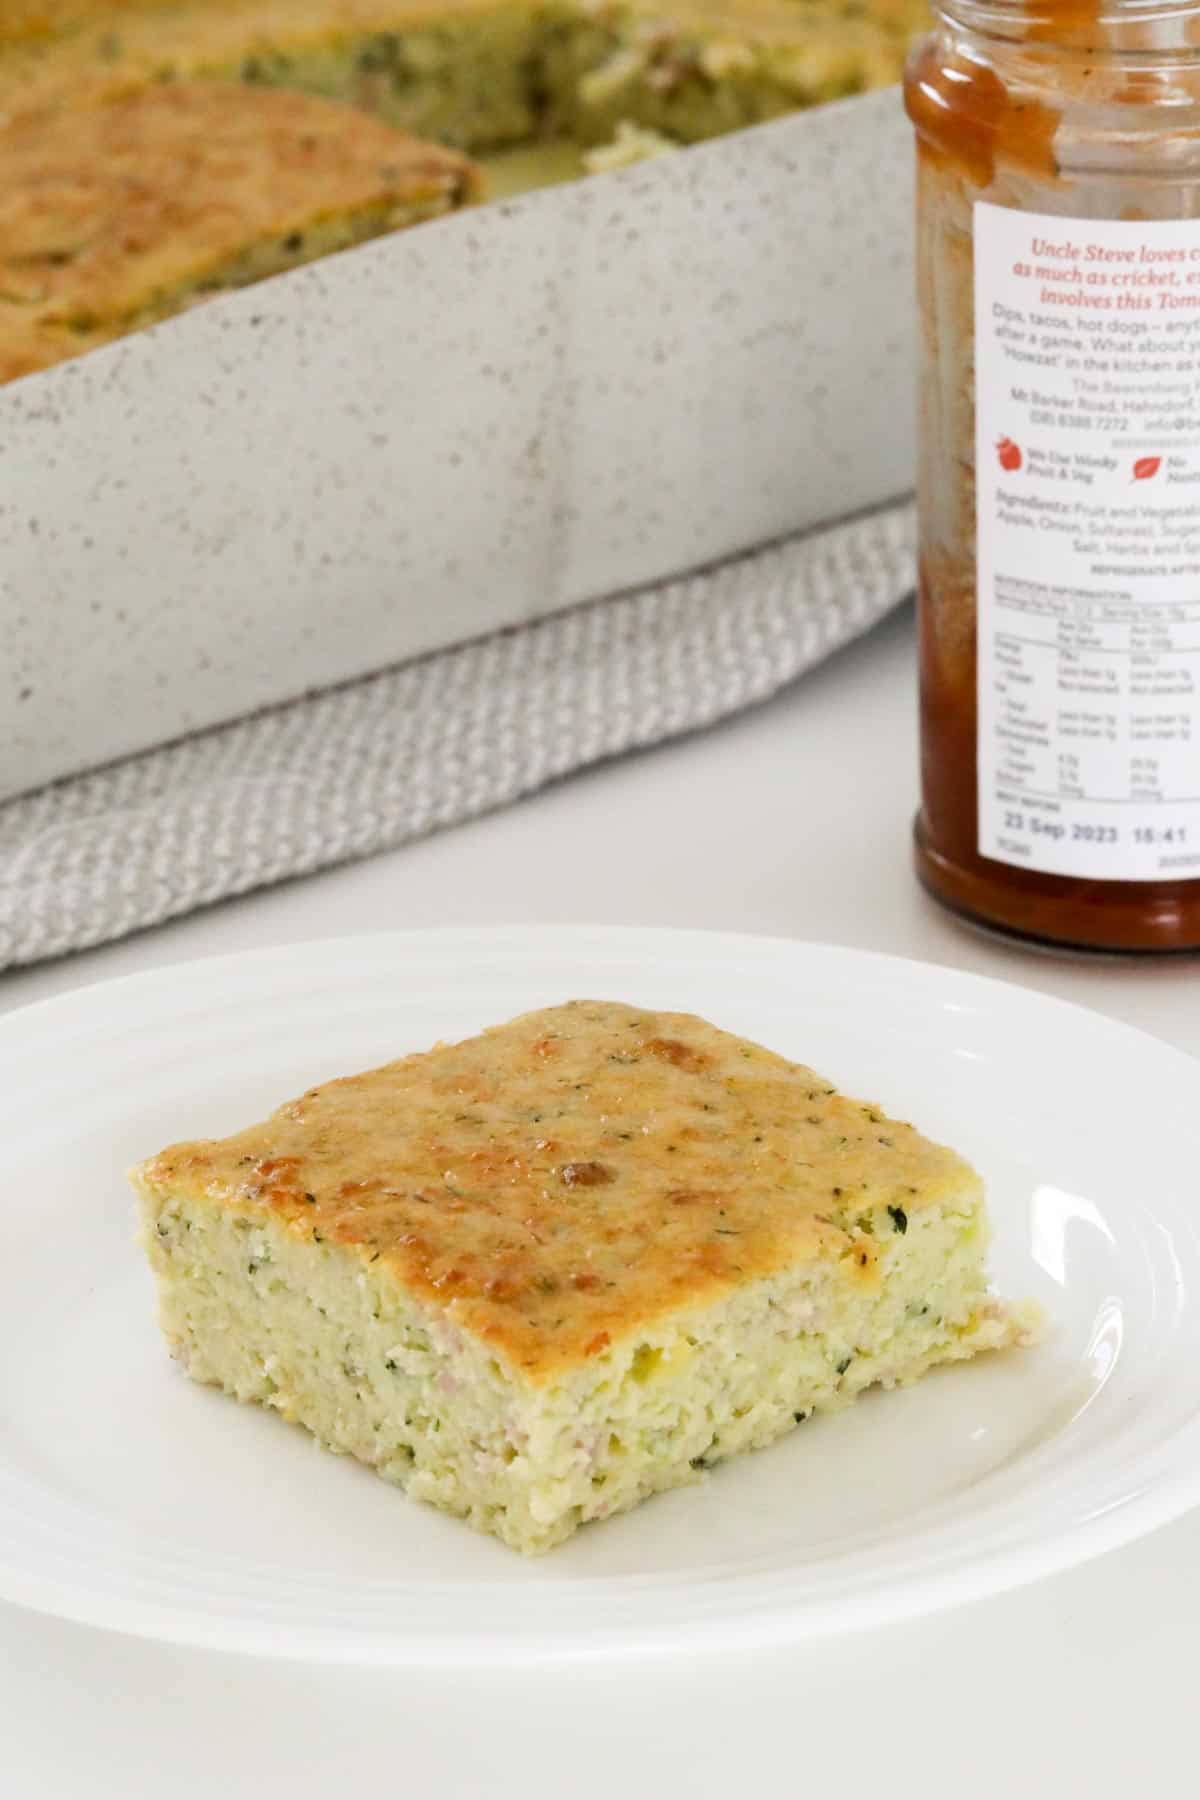 A square of savoury zucchini slice on a white plate, with a jar of chutney in the background.